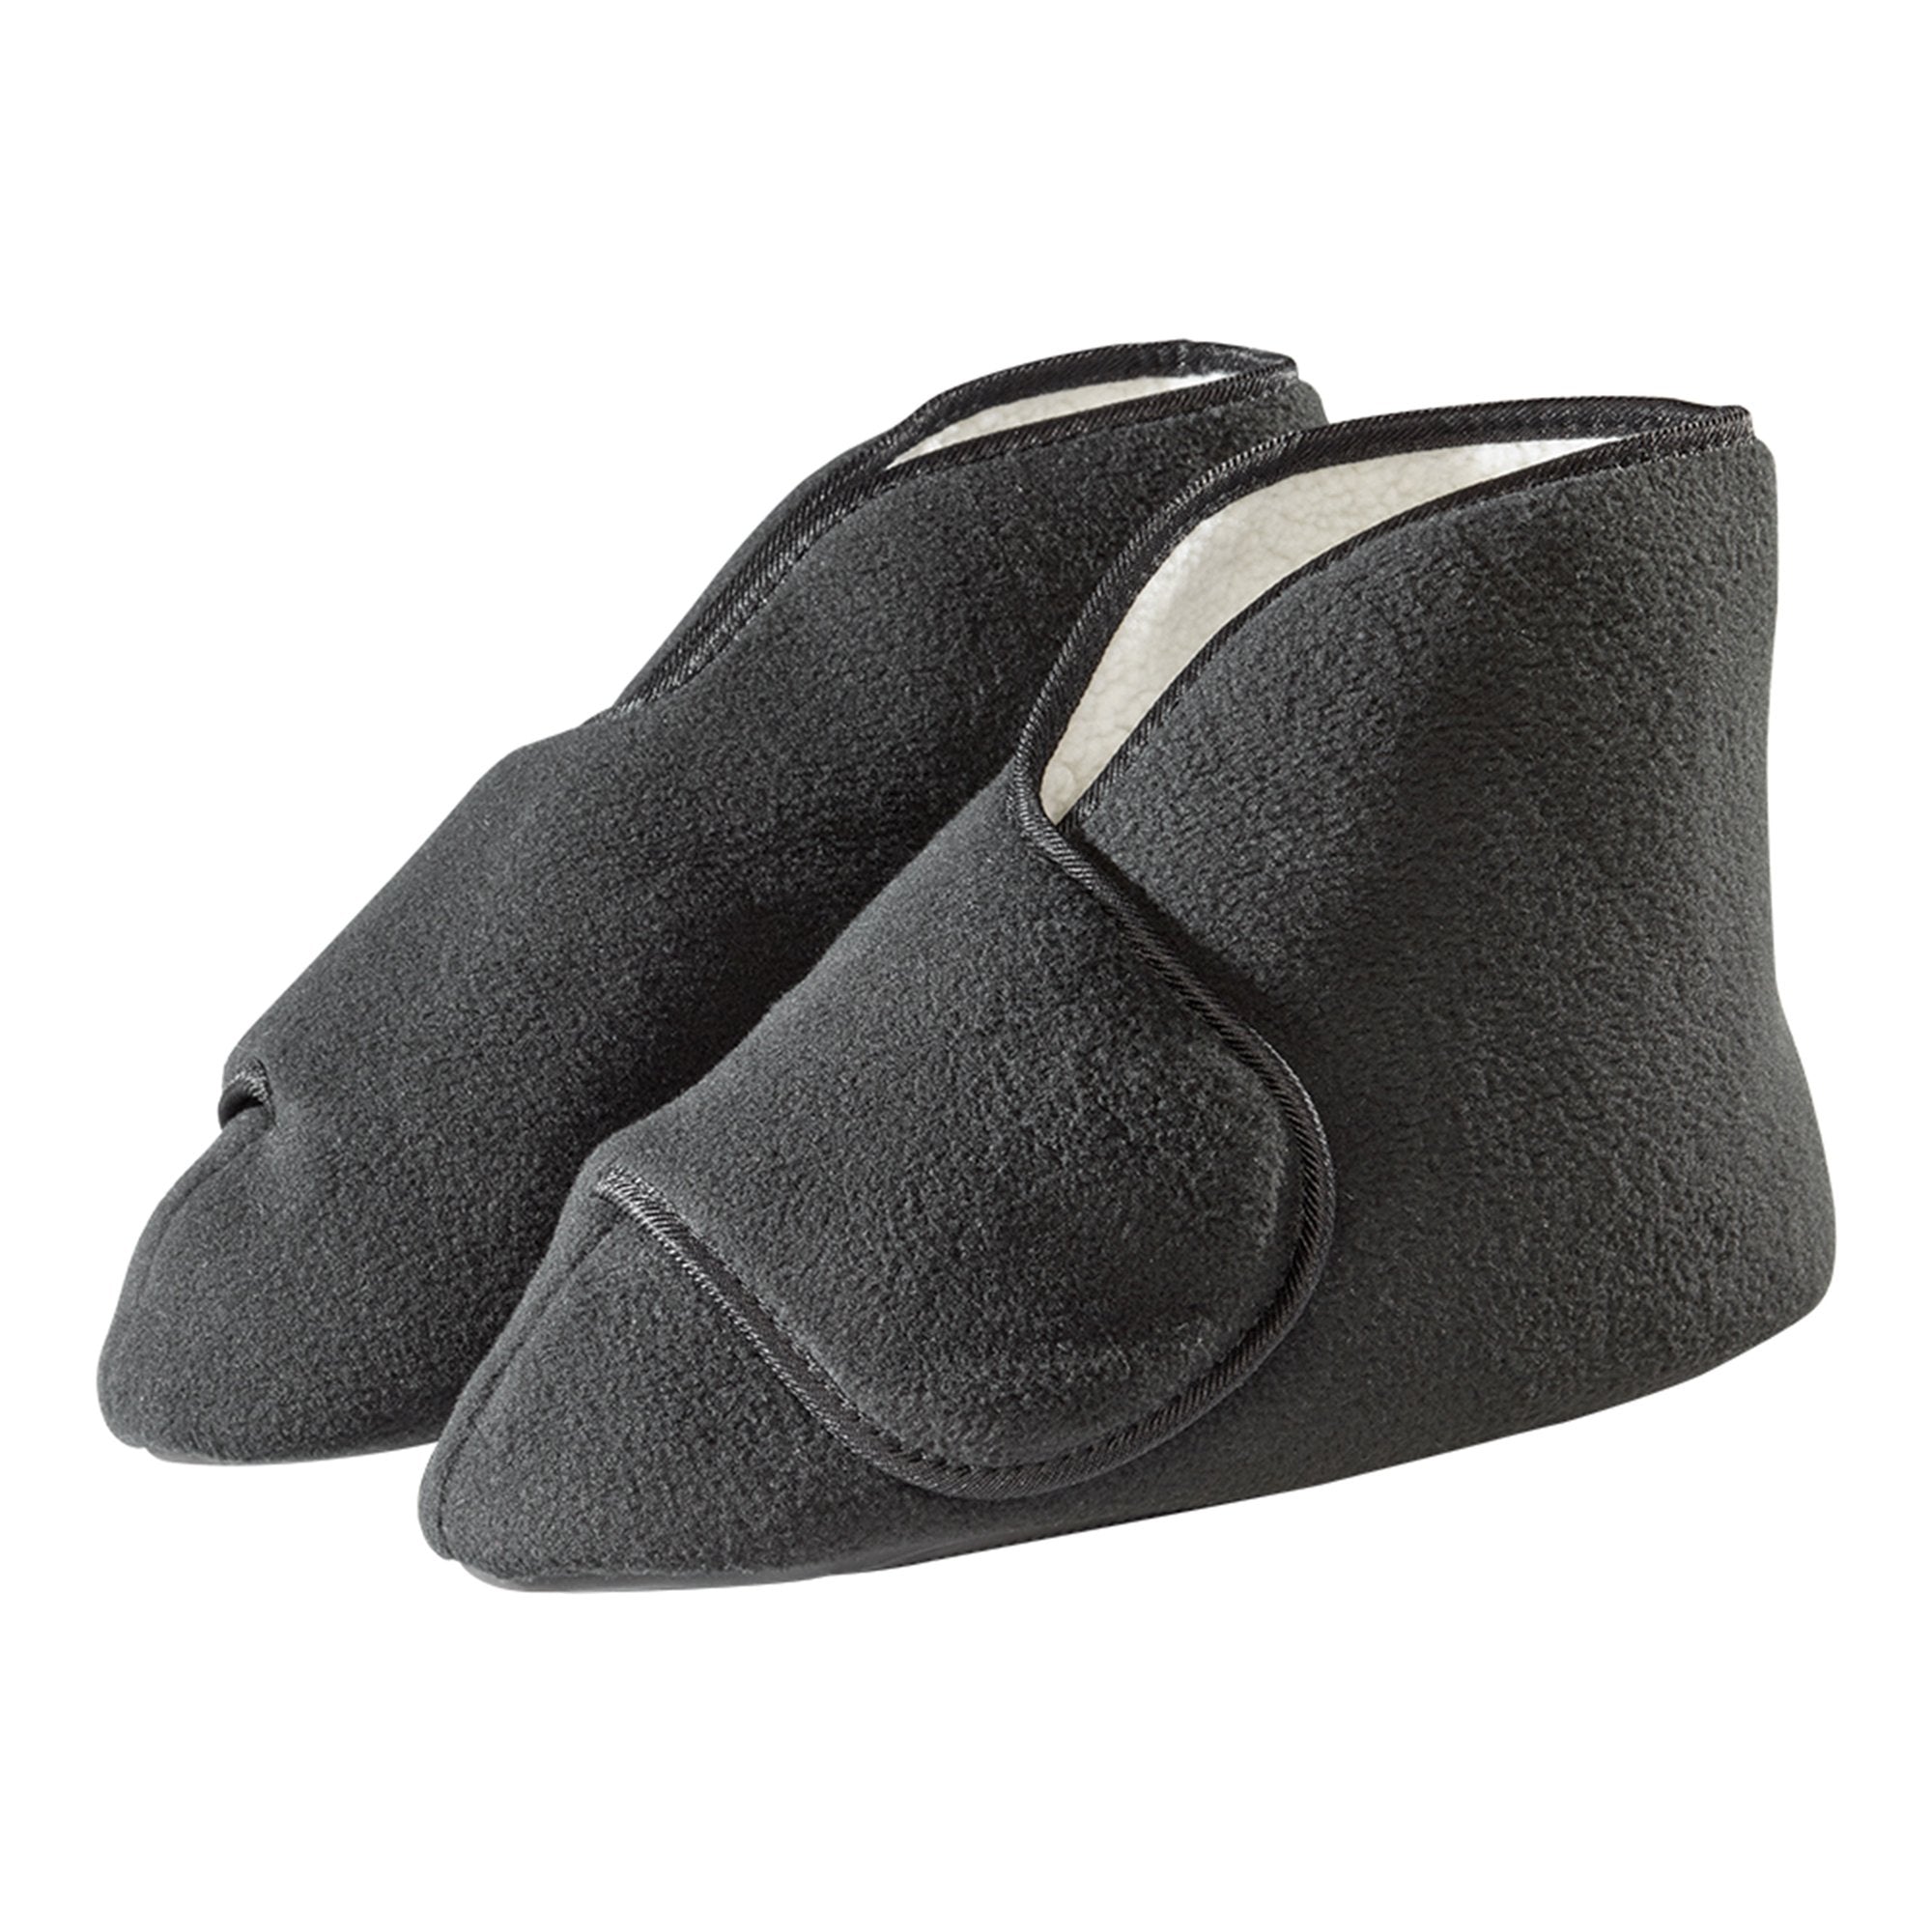 Diabetic Bootie Slippers Silverts 2X-Large / X-Wide Black Ankle High